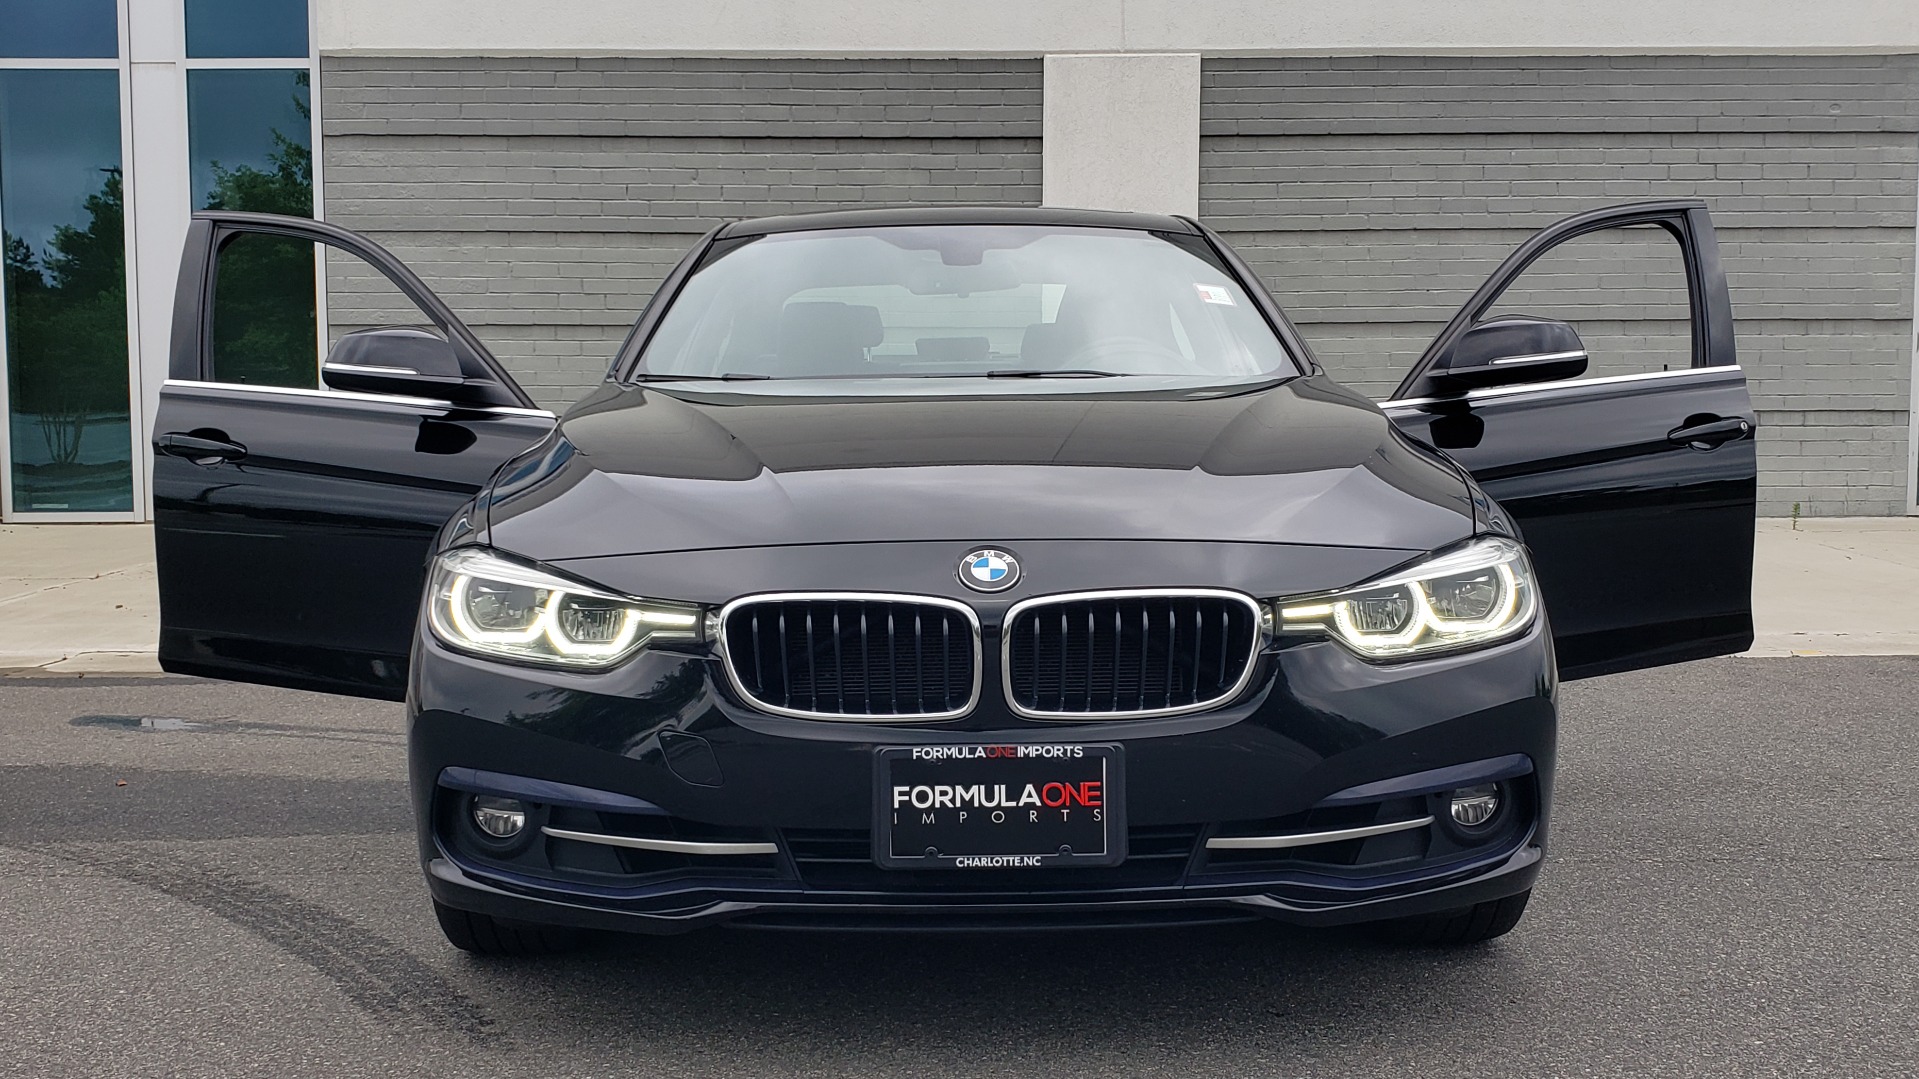 Used 2018 BMW 3 SERIES 330IXDRIVE / CONV PKG / NAV / SUNROOF / HTD STS / REARVIEW for sale Sold at Formula Imports in Charlotte NC 28227 19